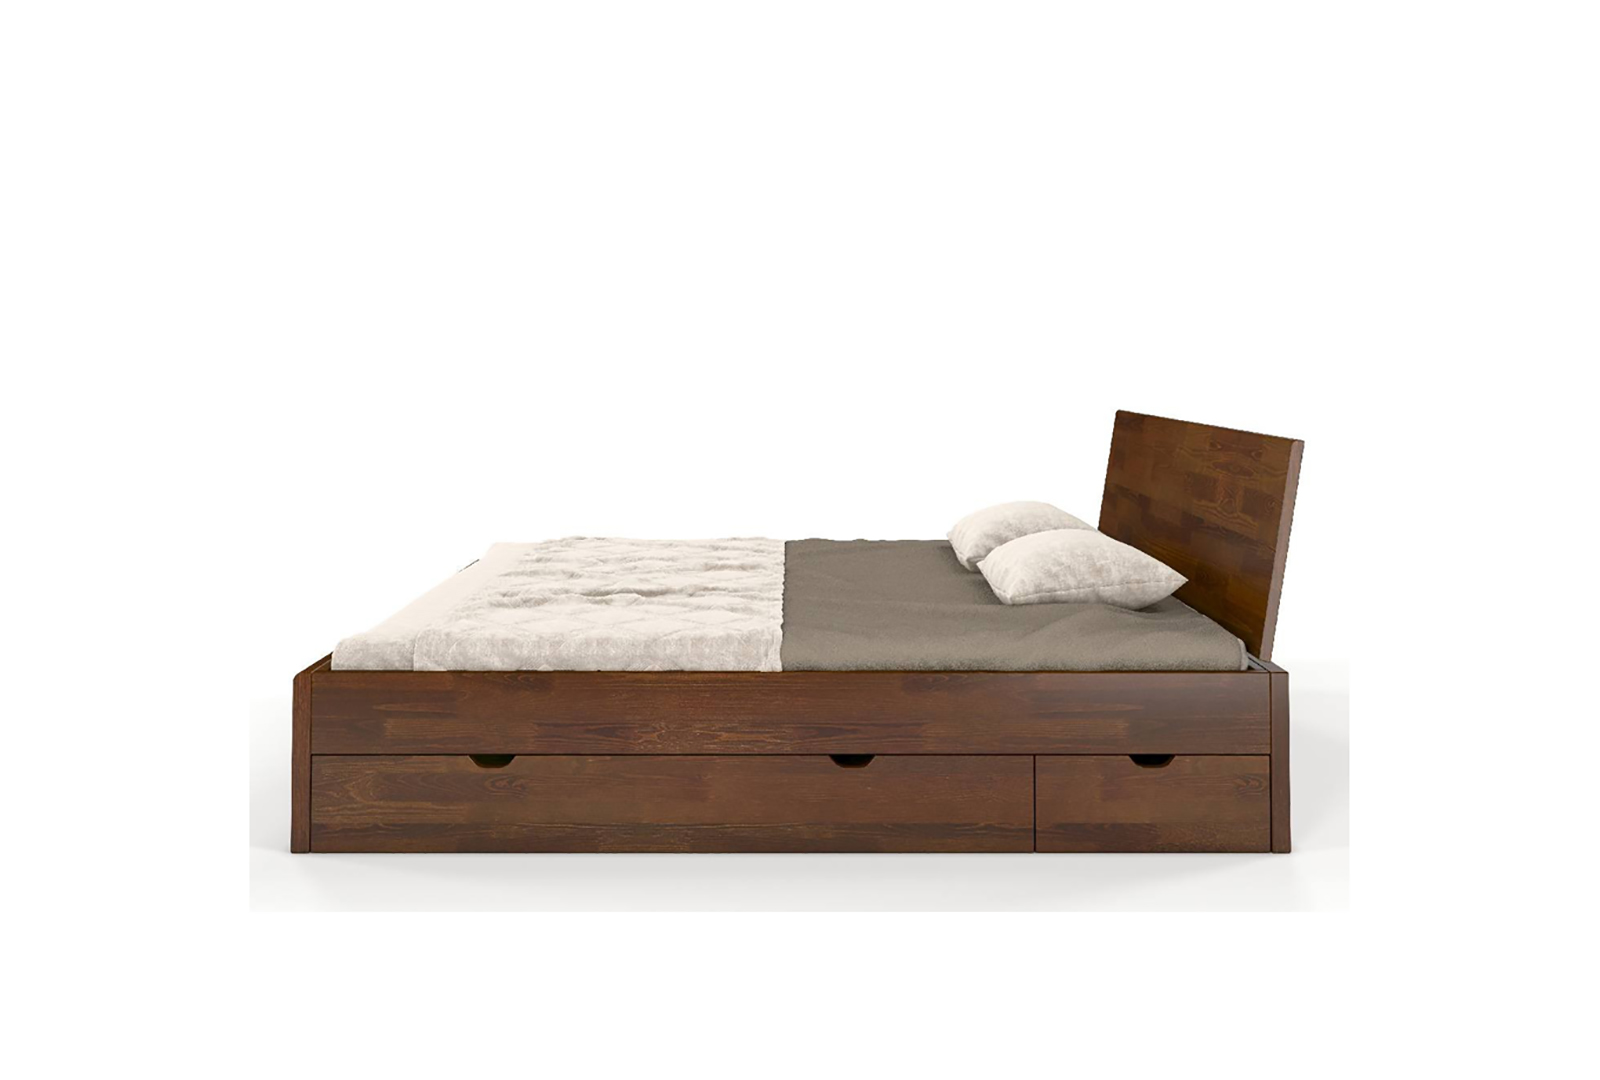 WOODEN PINE BED WITH DRAWERS SKANDICA VESTRE MAXI AND DR 1